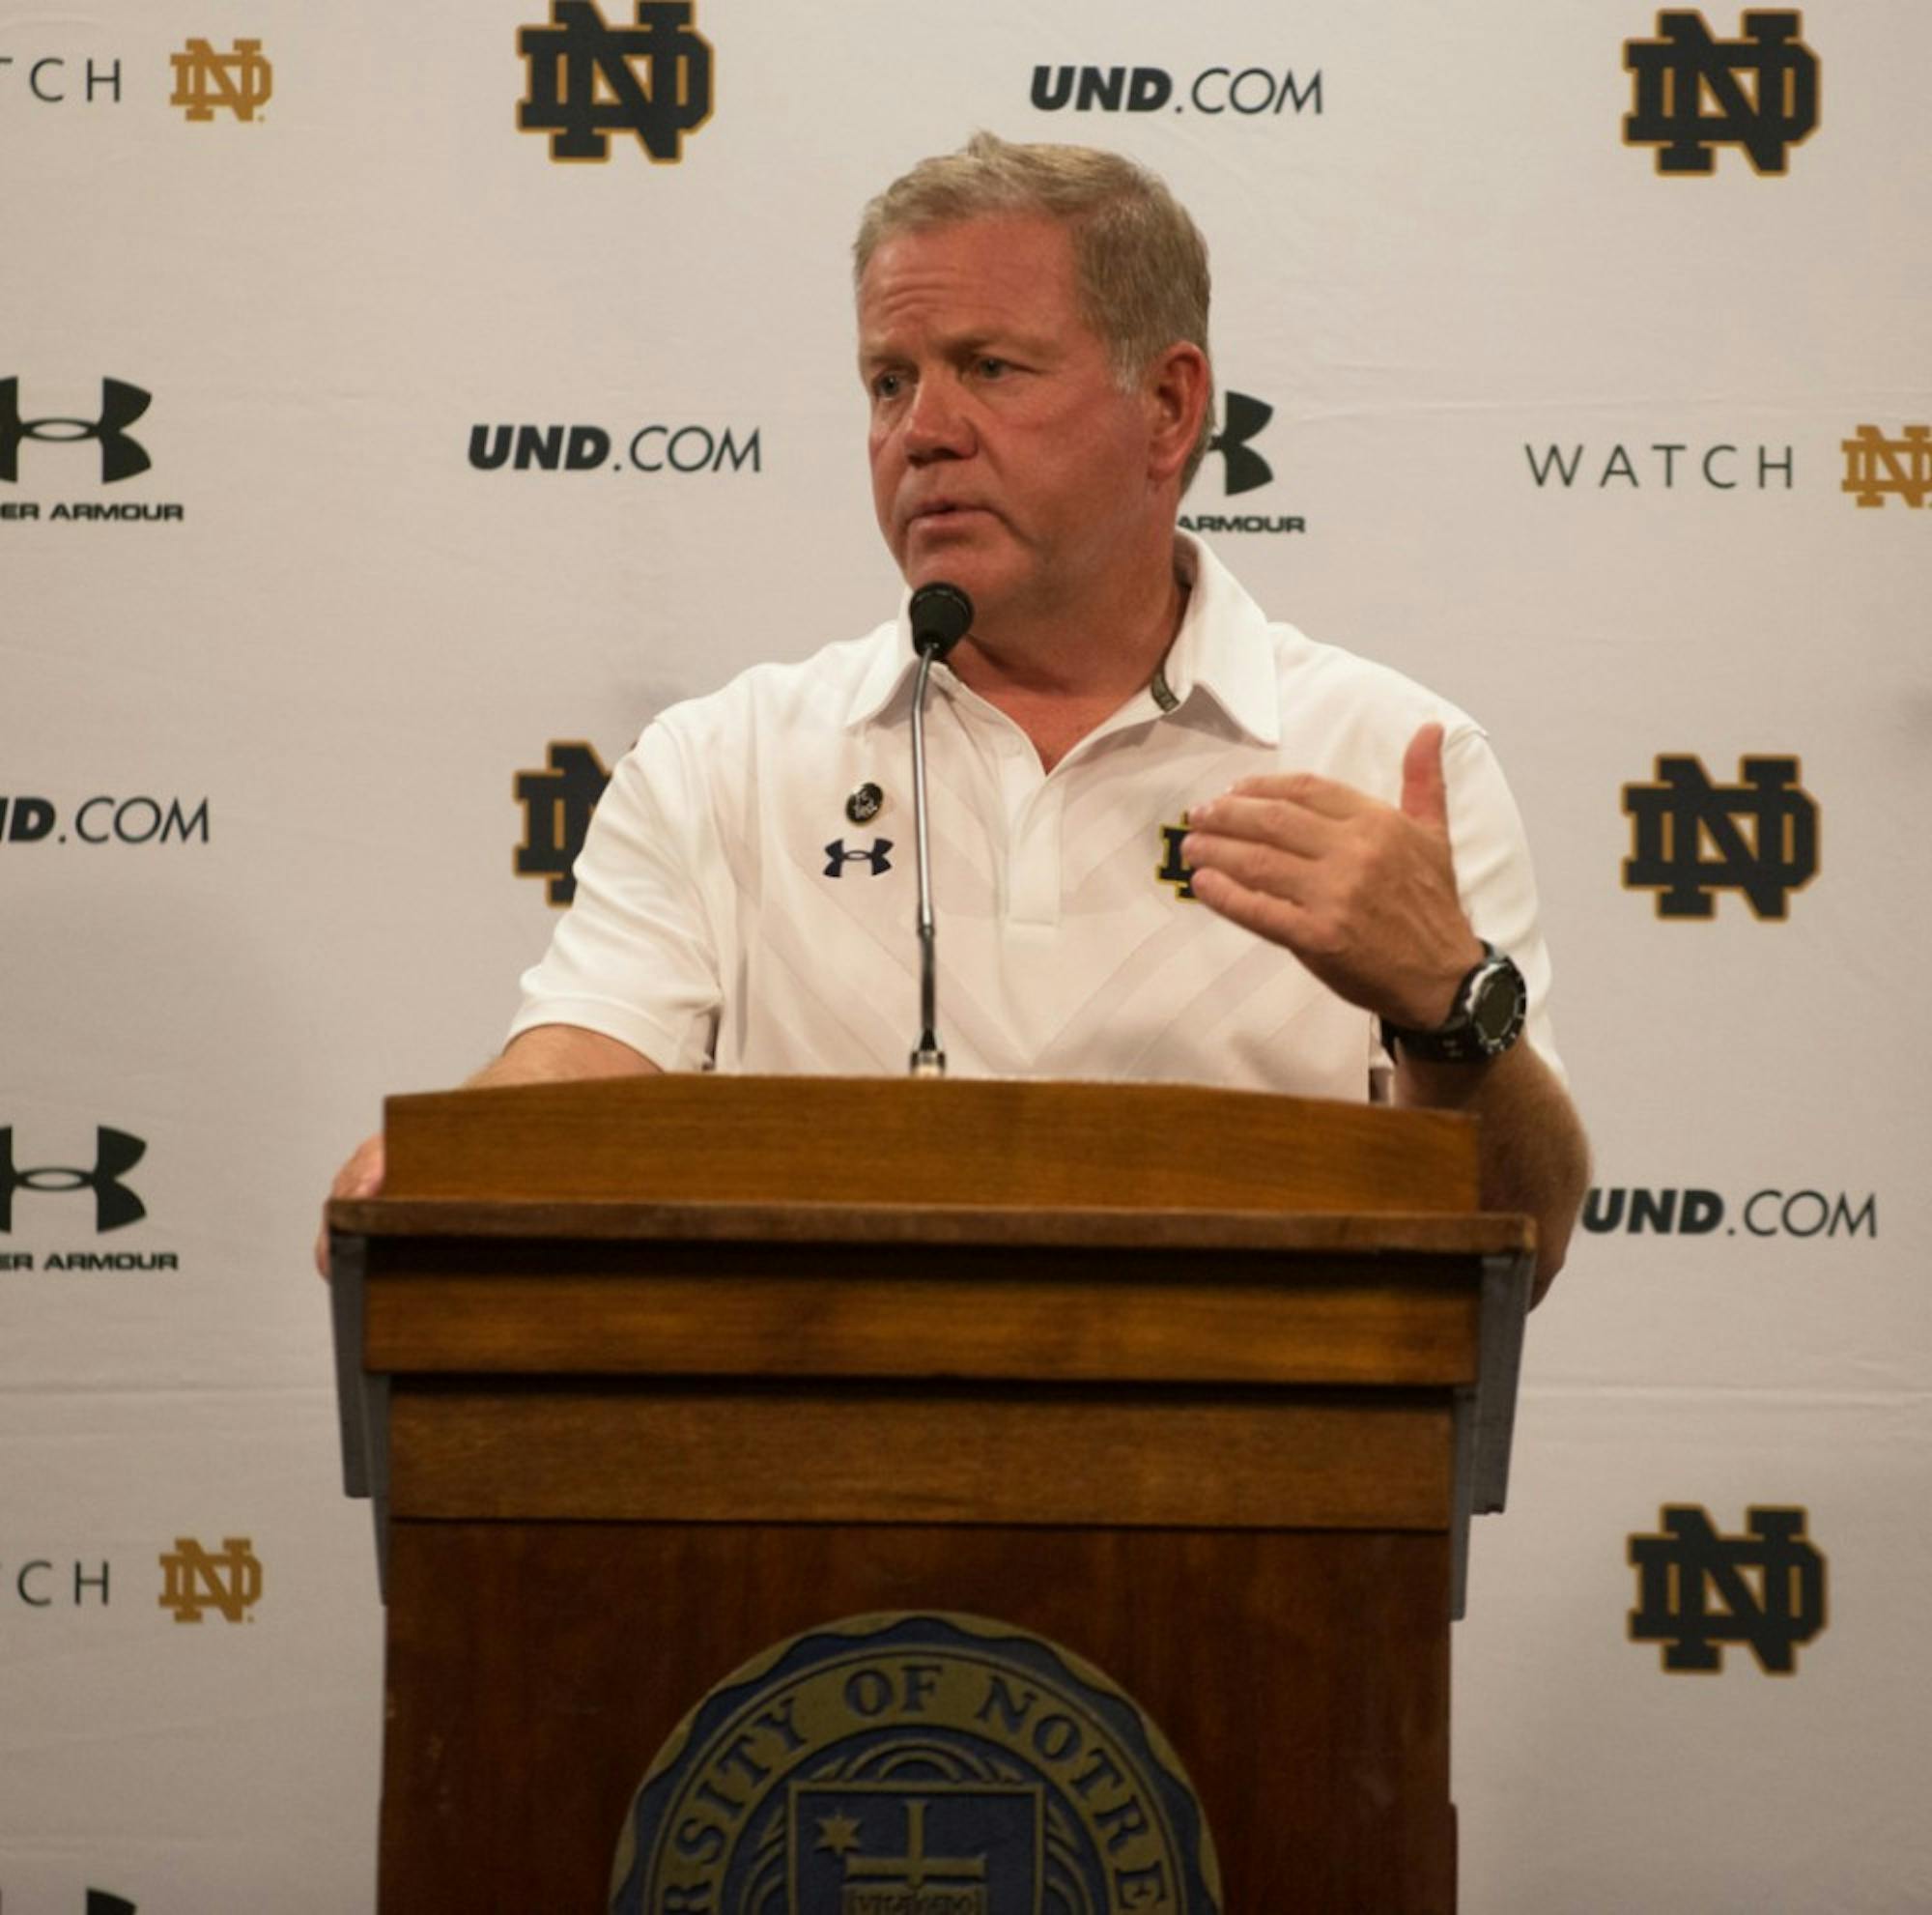 Irish head coach Brian Kelly addresses the media after Notre Dame's 38-3 victory over Texas at Notre Dame Stadium to open the 2015 season.